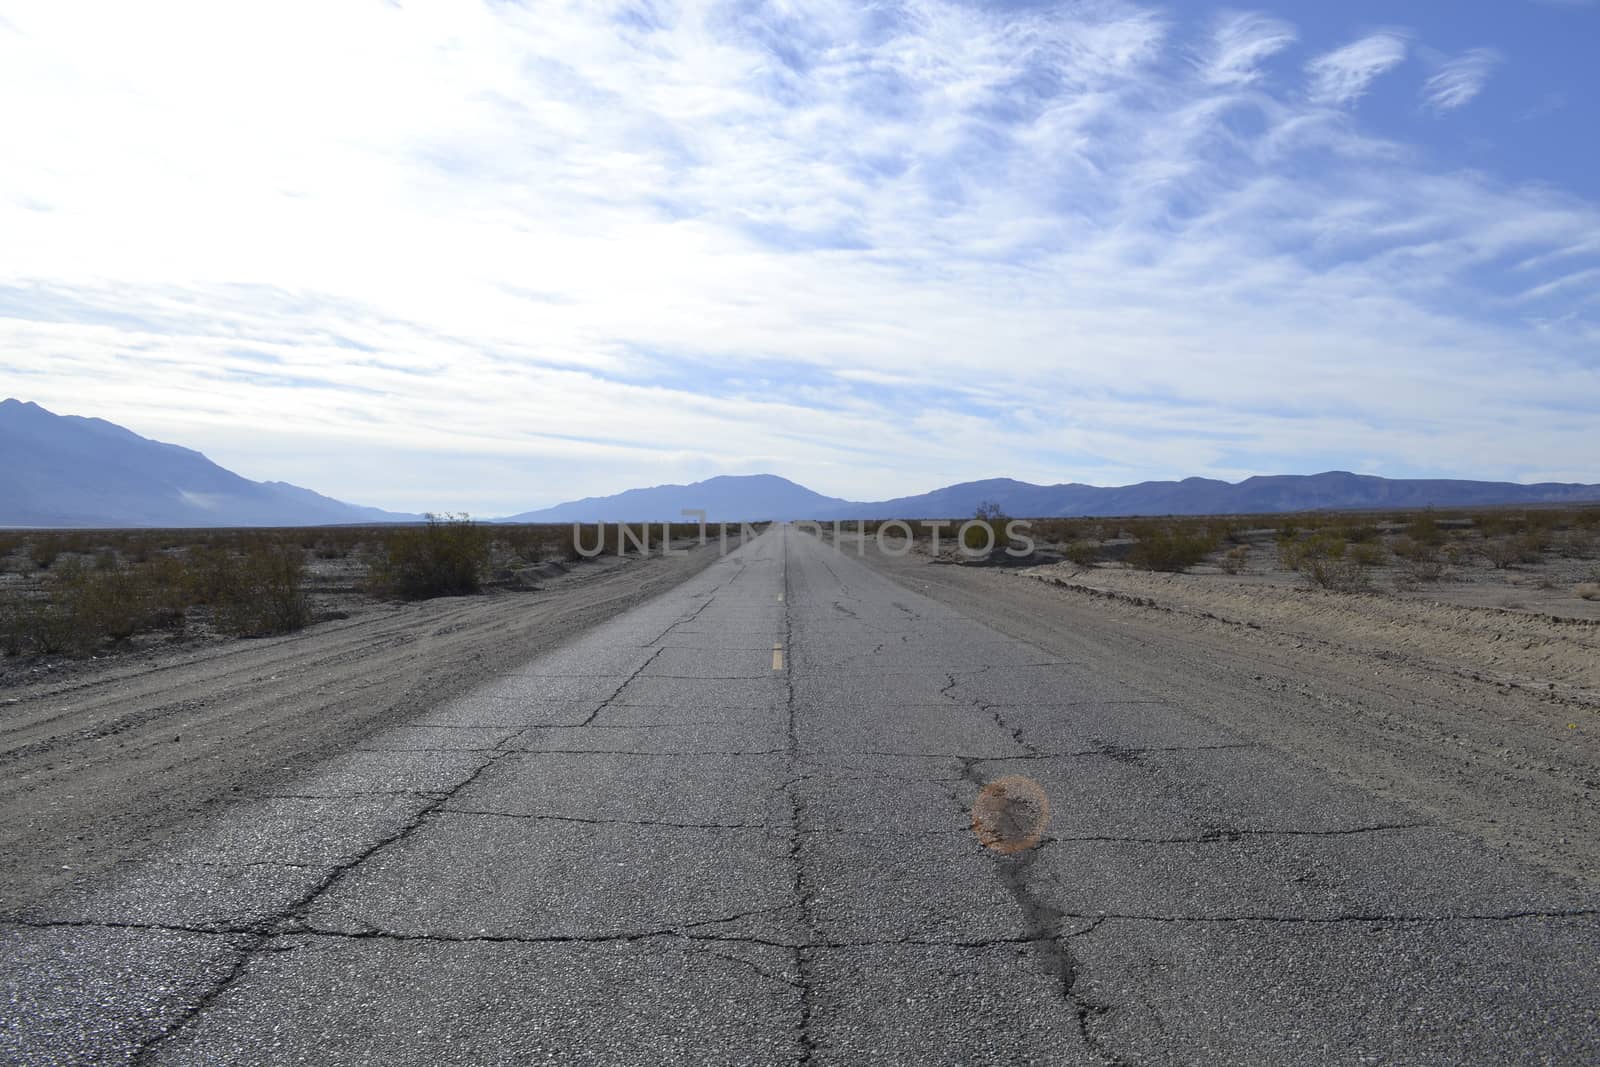 One of the many long roads in the Death Valley National Park